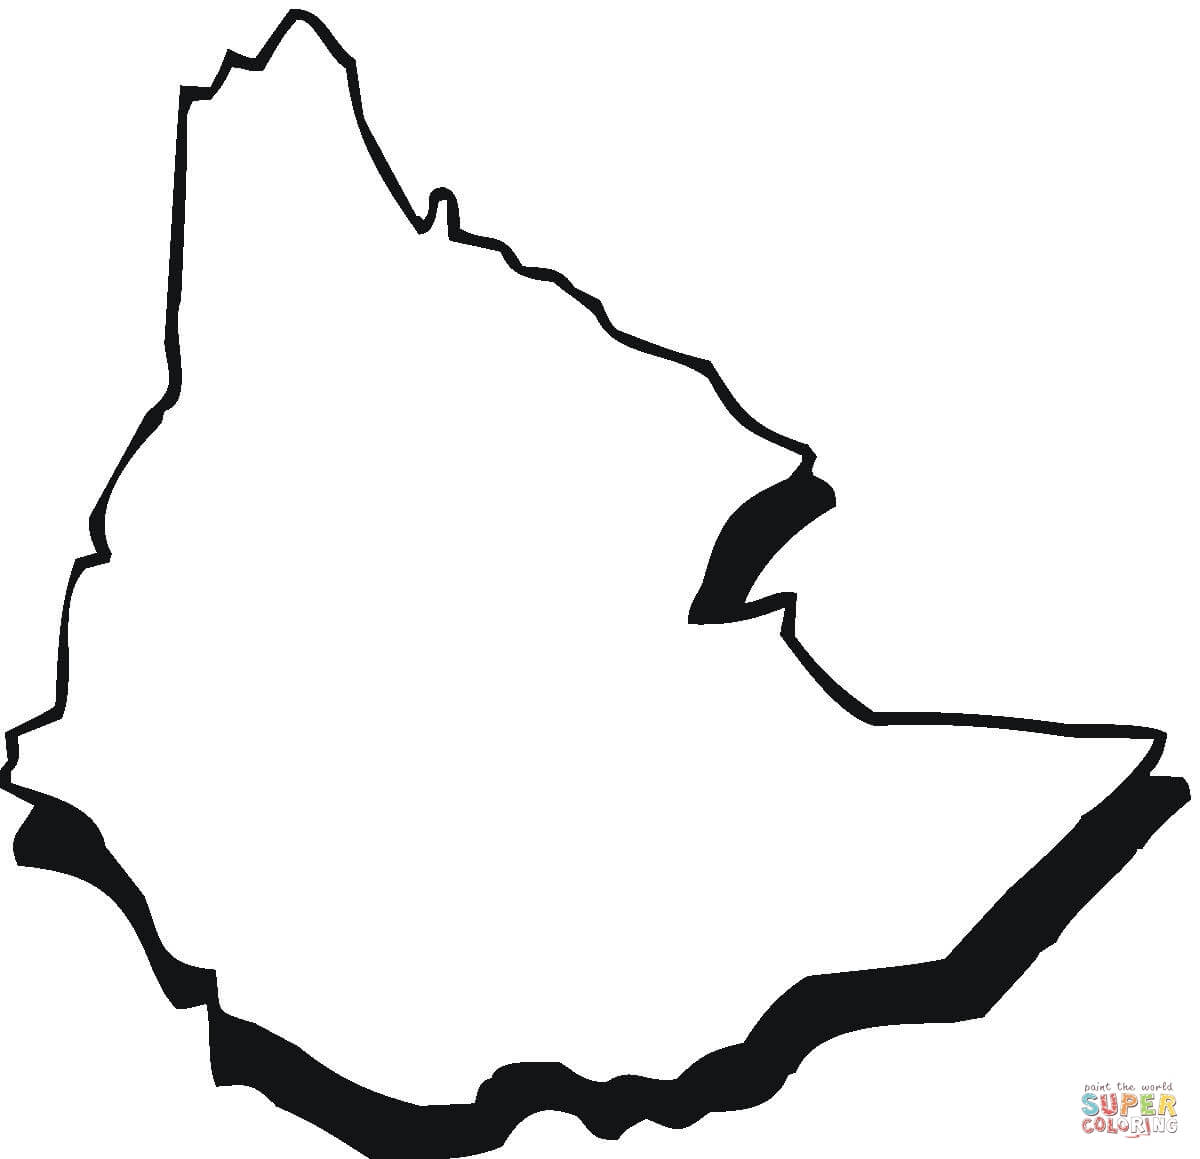 Map of Africa coloring page | Free Printable Coloring Pages